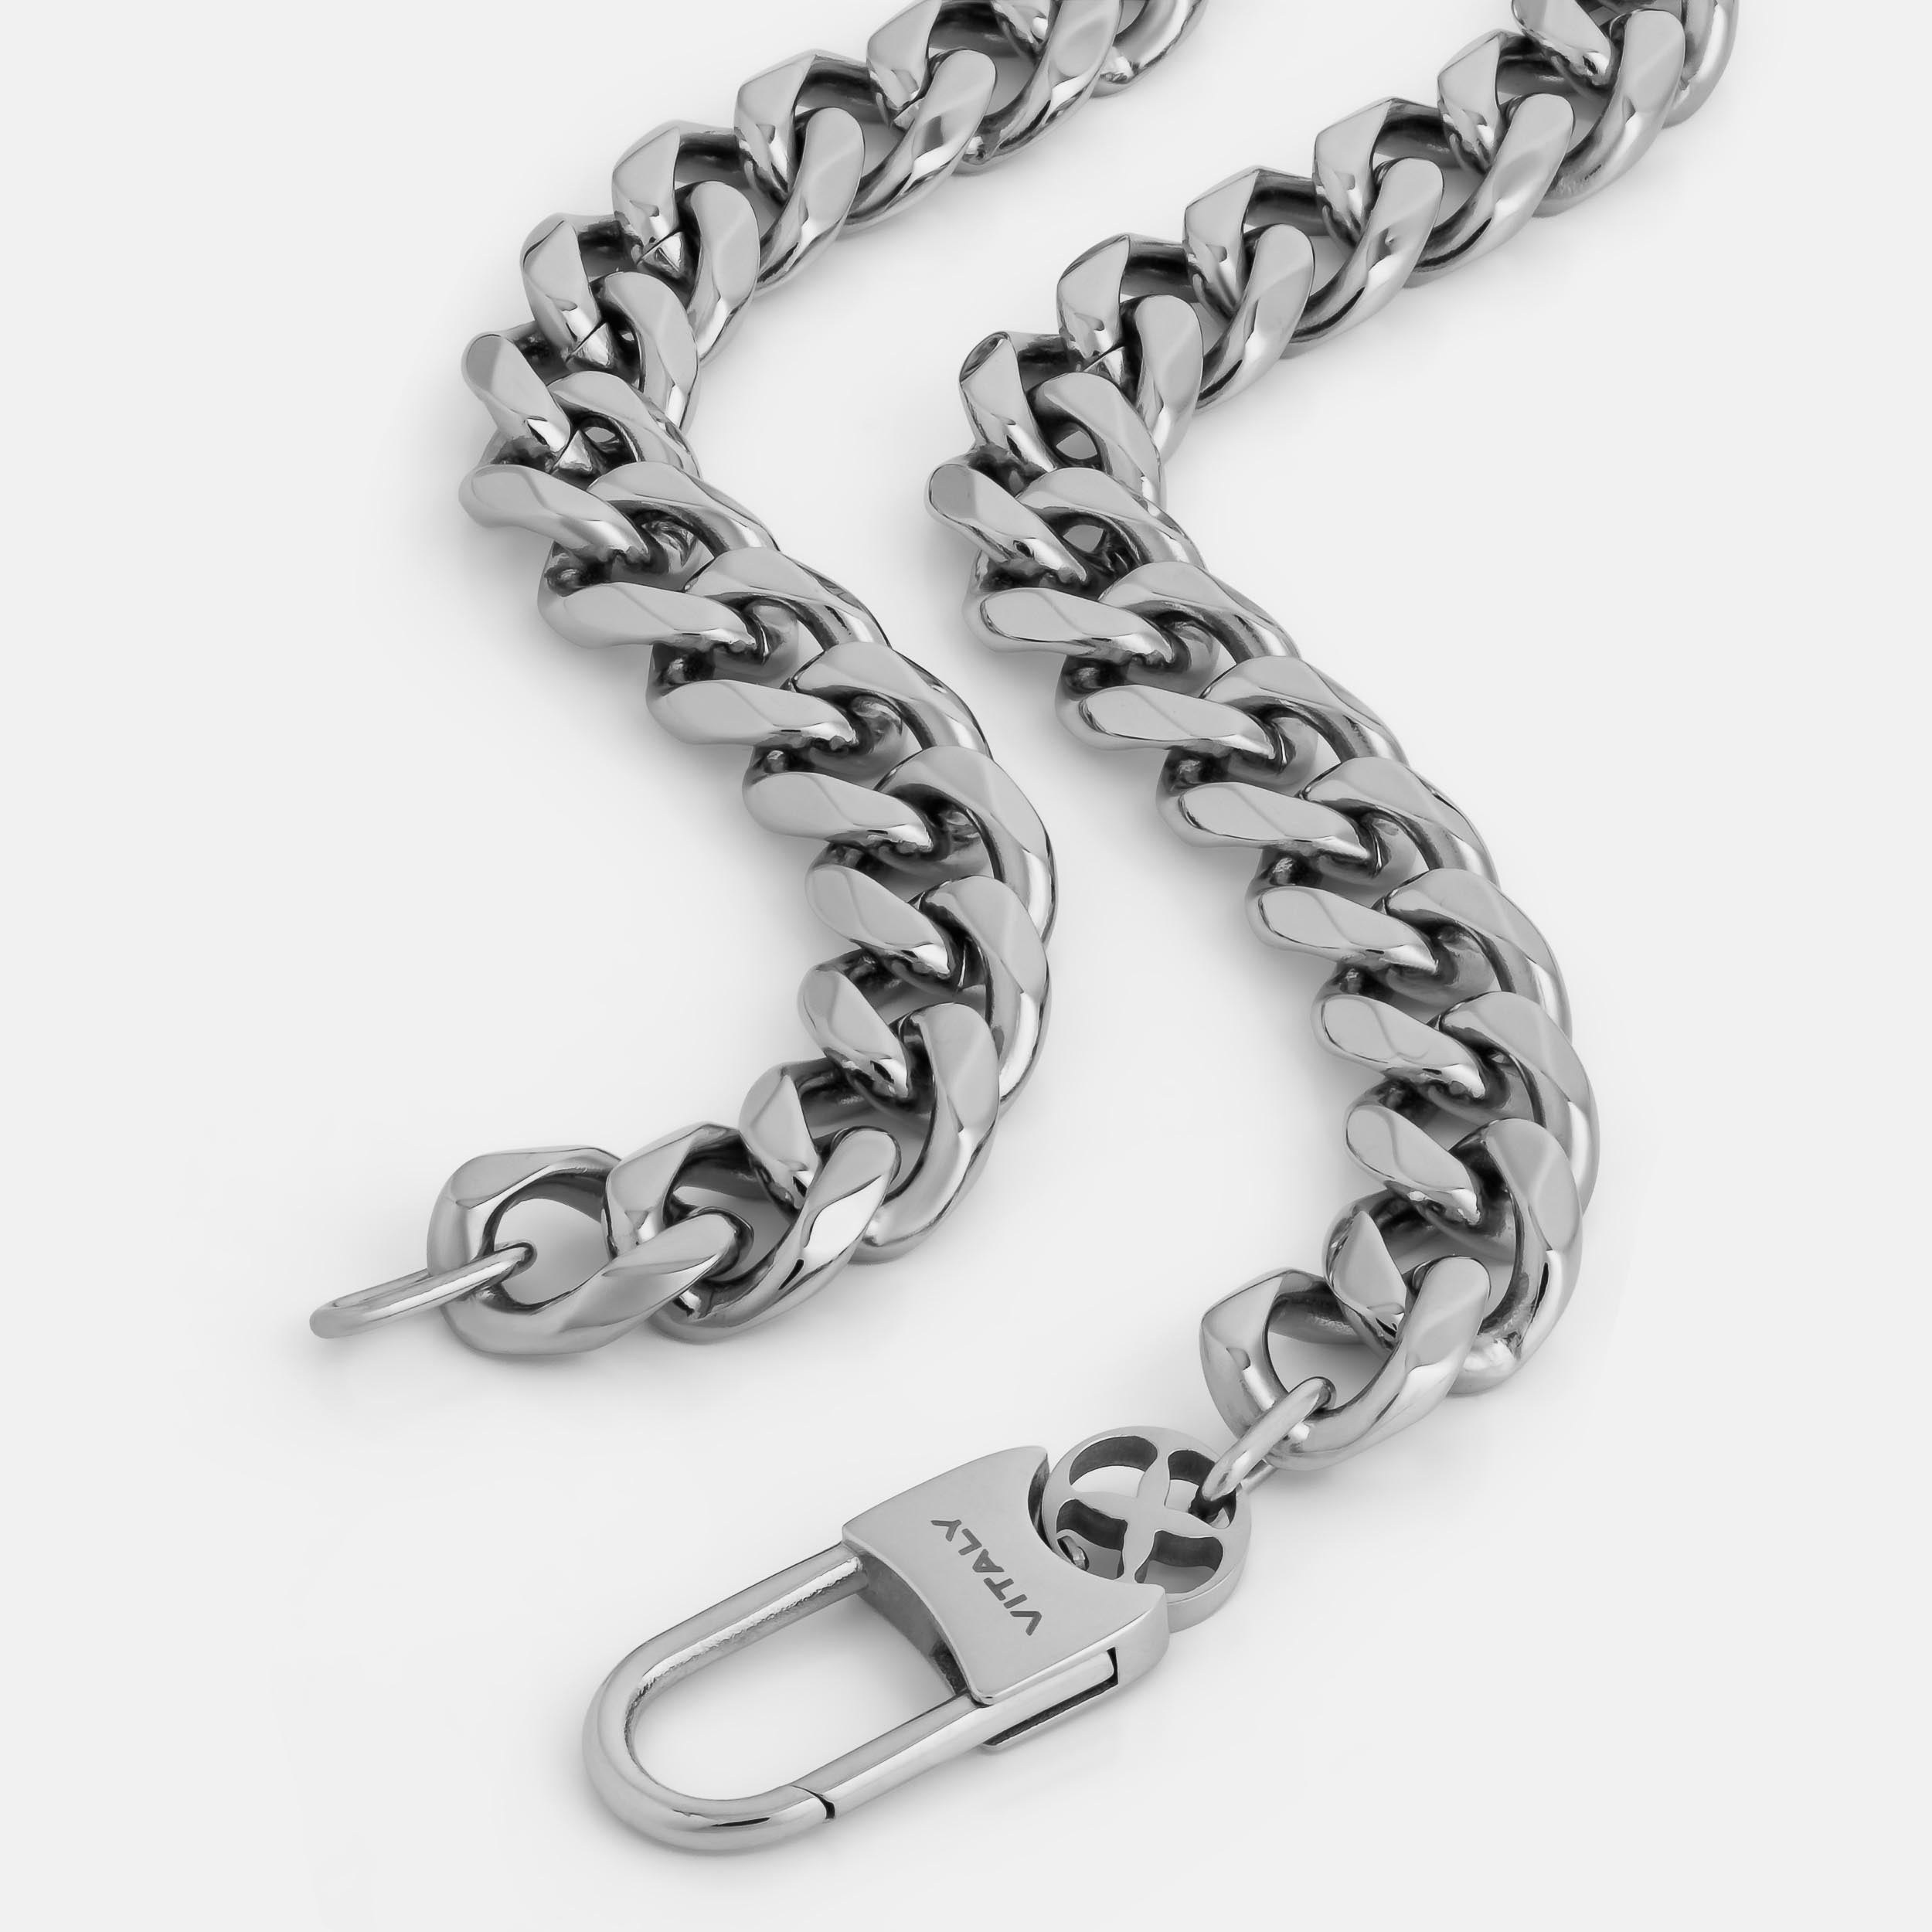 Vitaly Transit Choker Chain  100% Recycled Stainless Steel Accessories